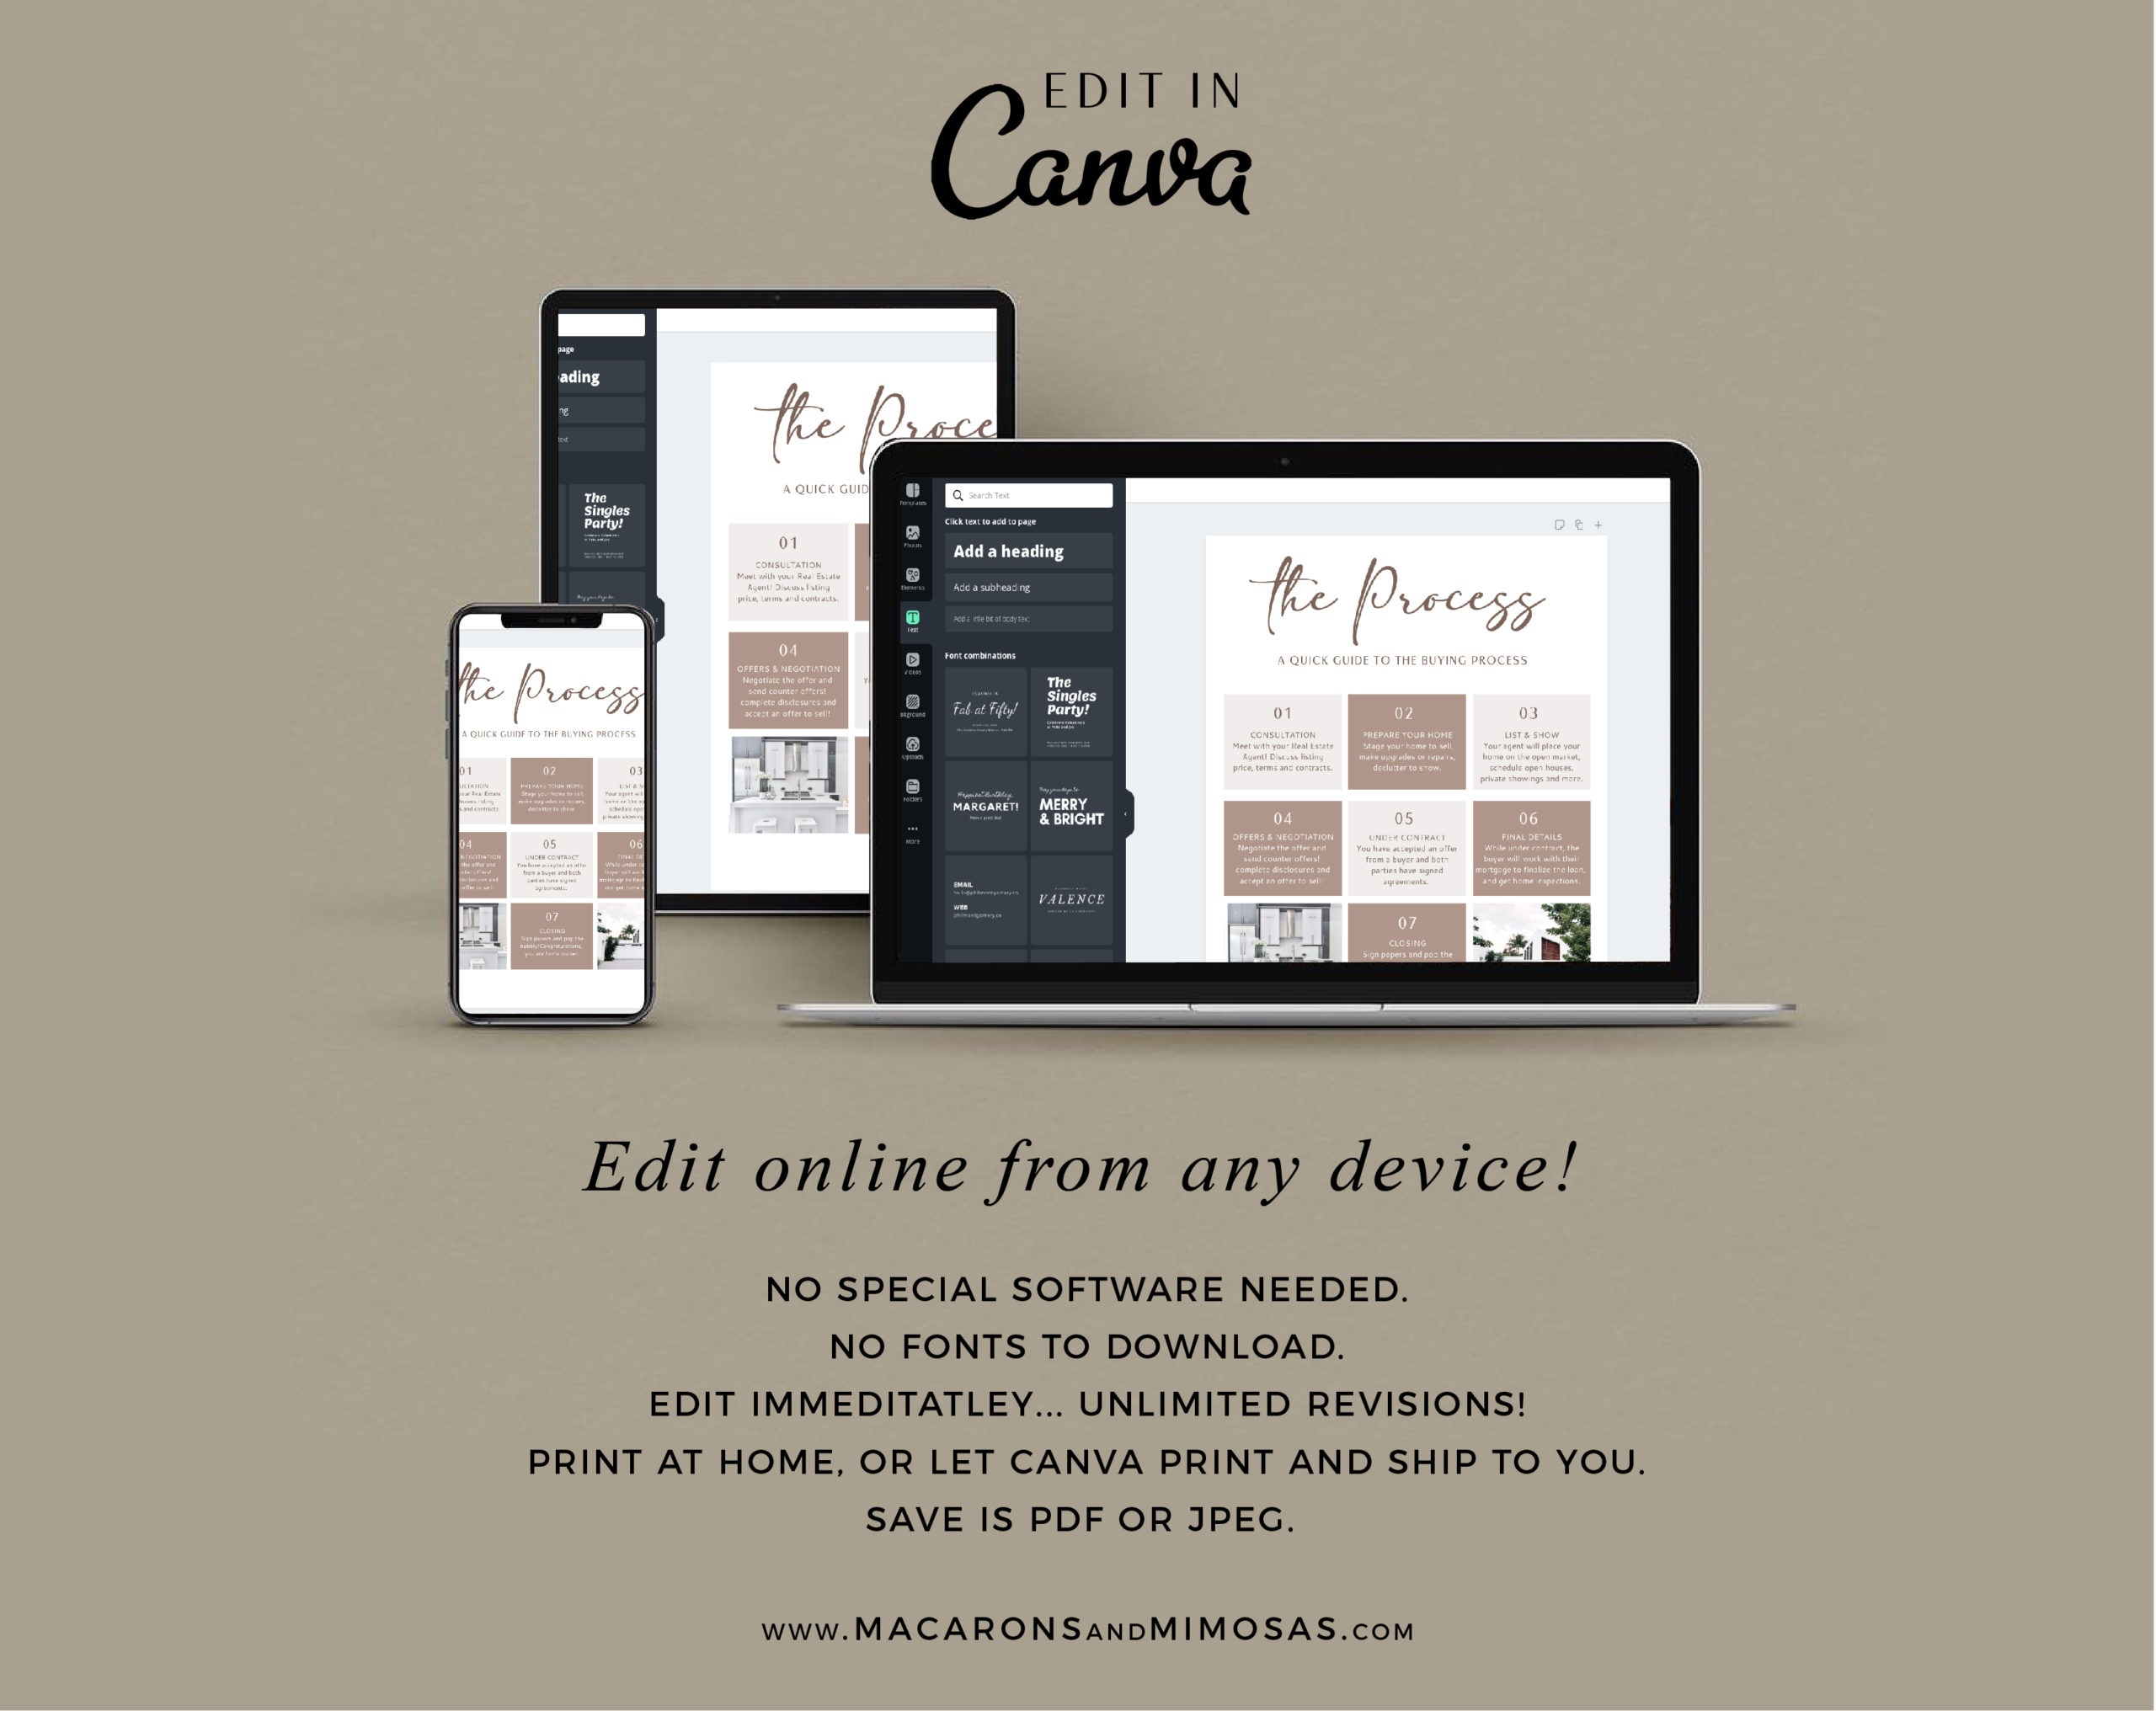 Home Buyers Guide Template, Real Estate Presentation Marketing Listing for Canva, 9 Page Buyer Home Packet with Questionnaire, House Buying Guide